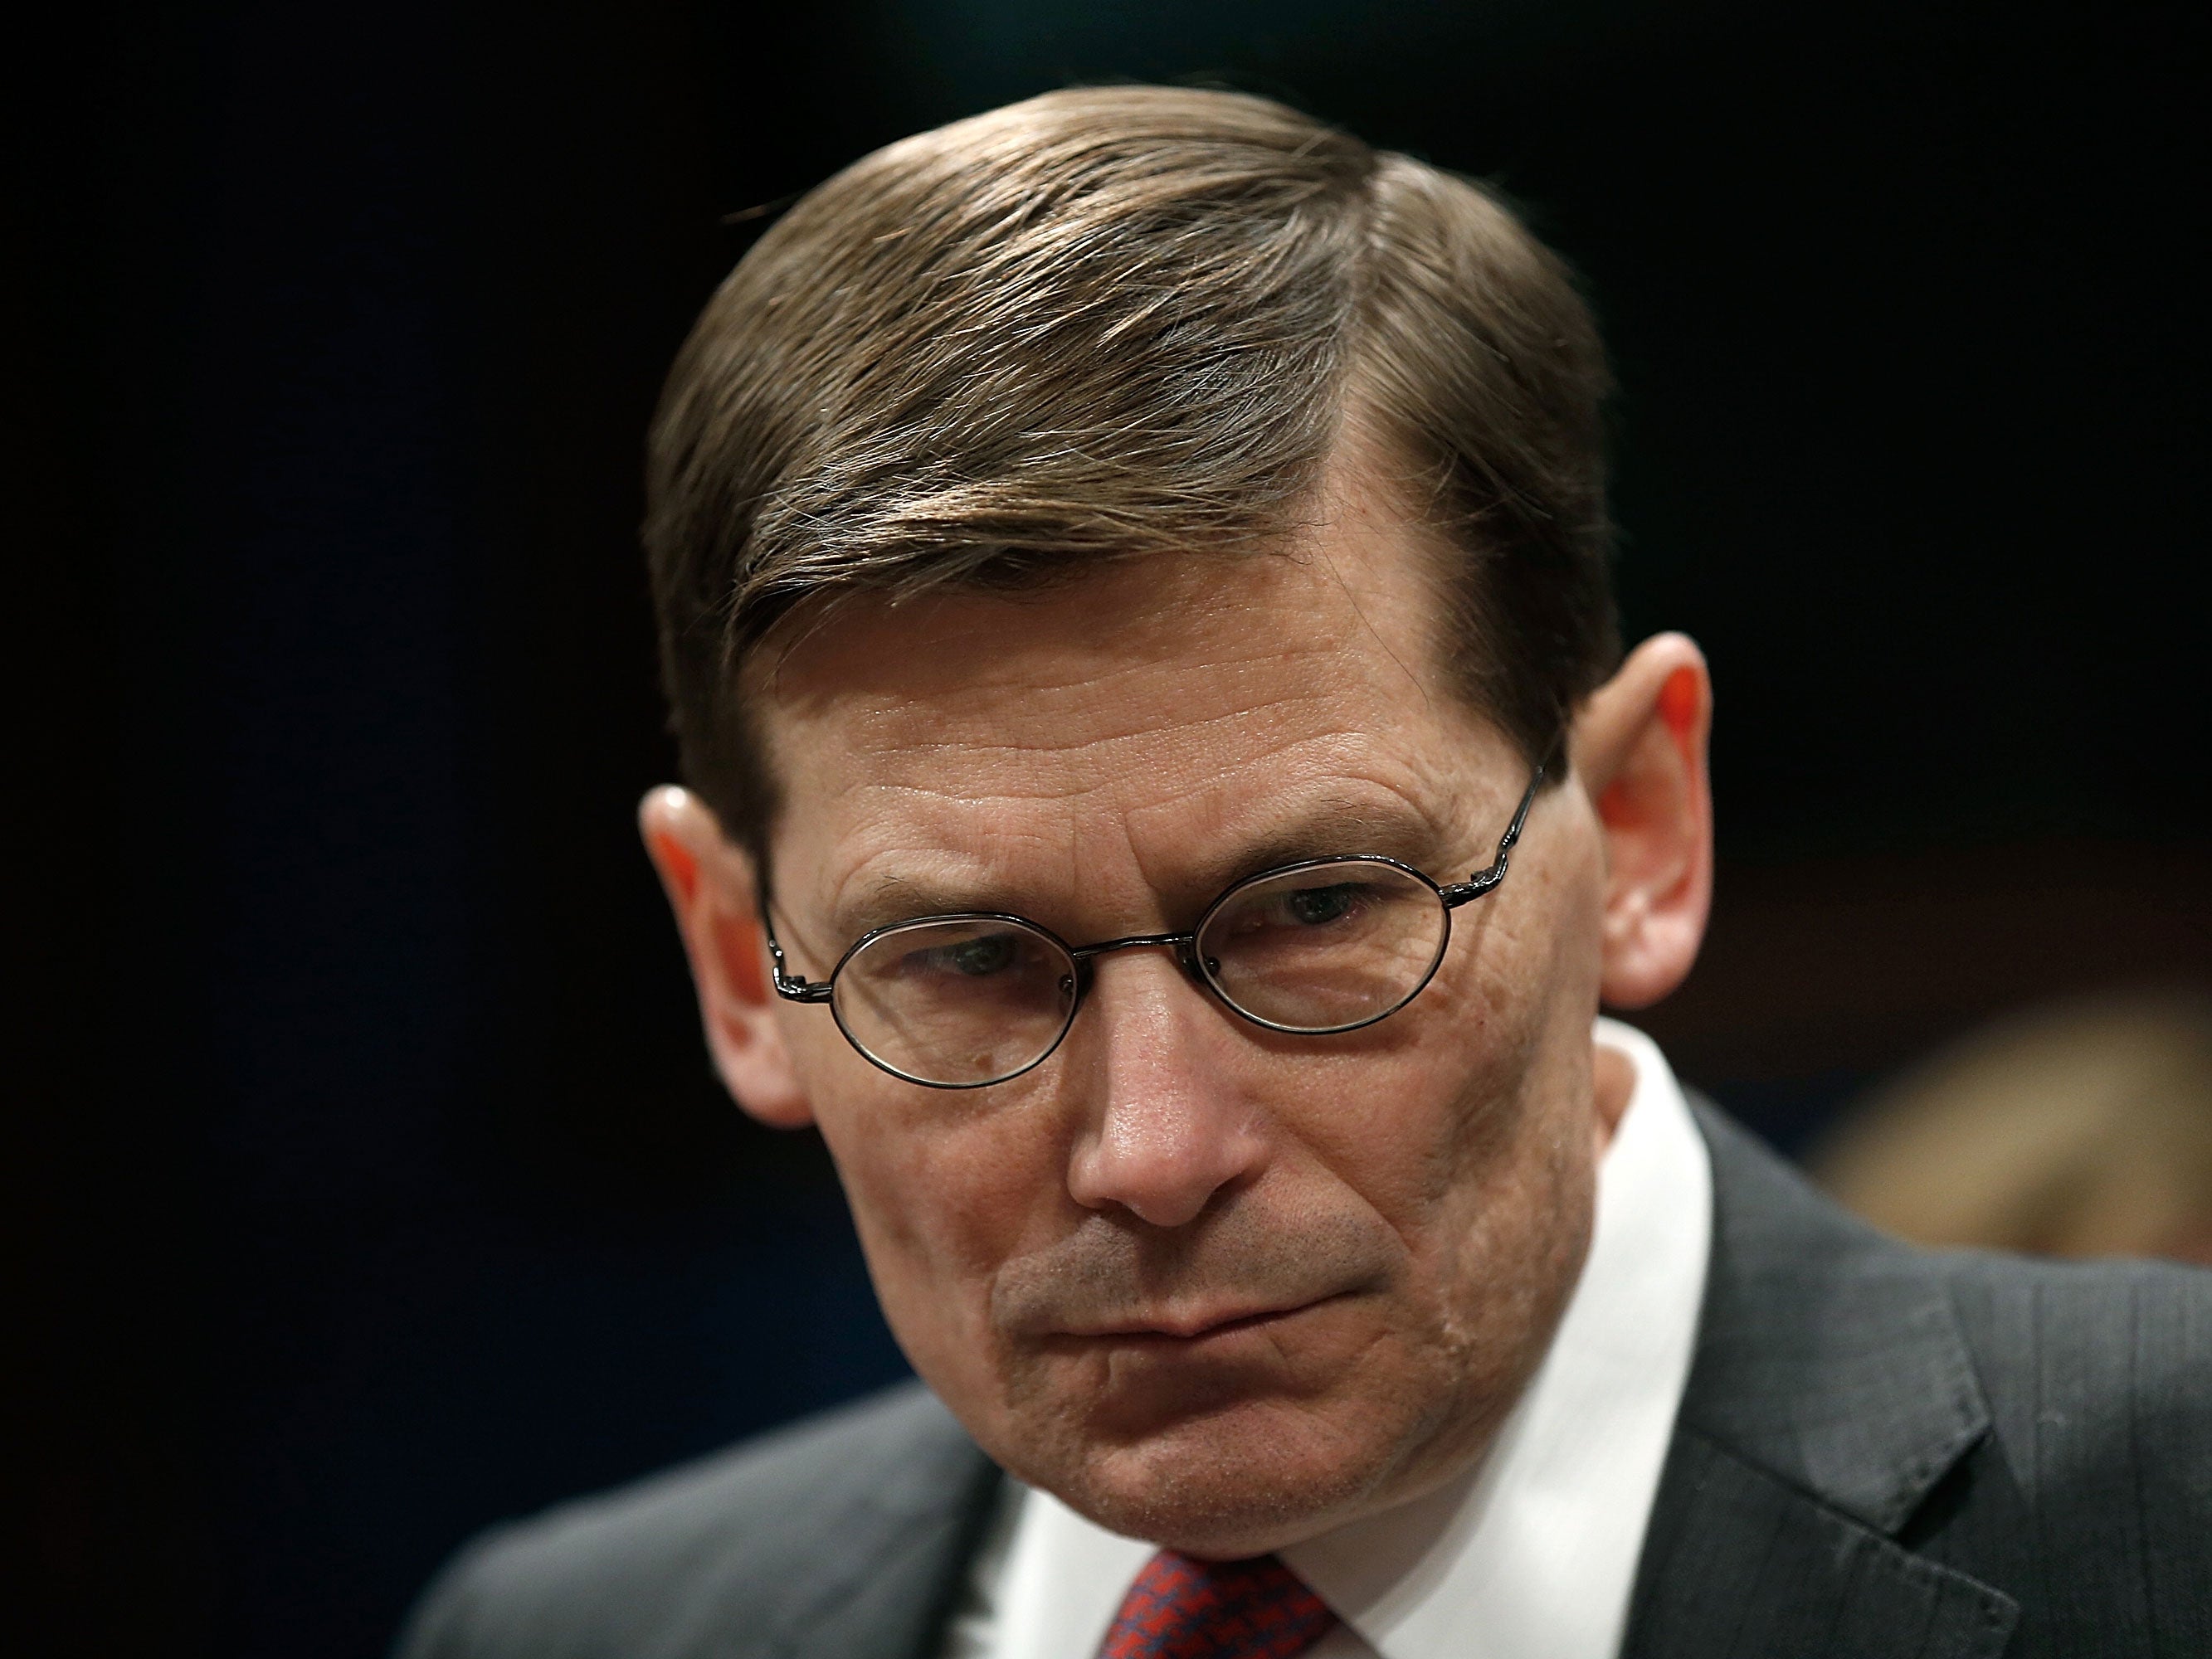 Former acting CIA Director Michael Morell